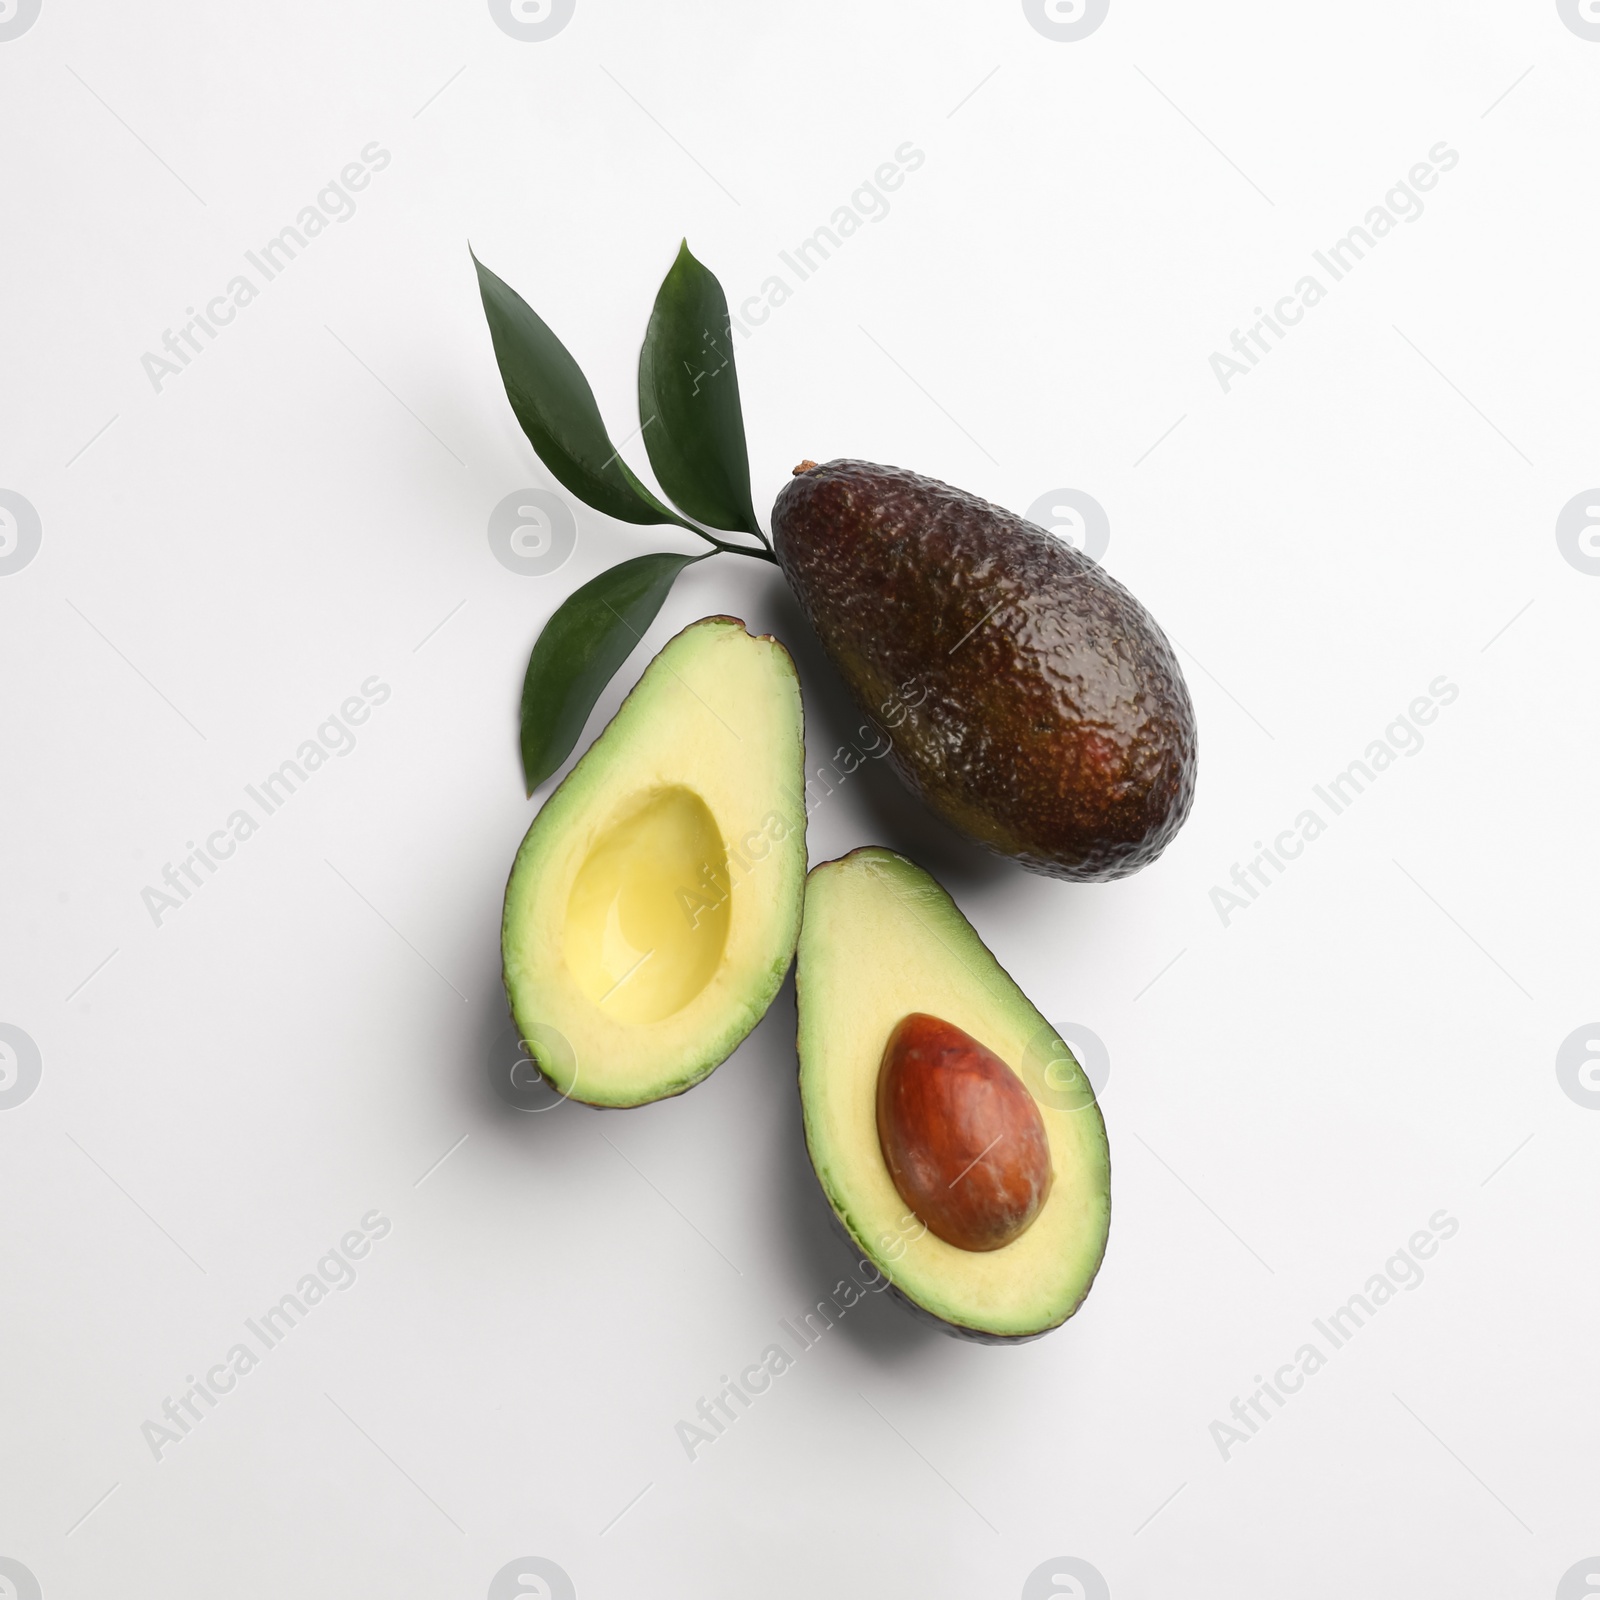 Photo of Whole and cut ripe avocadoes with green leaves on white background, top view